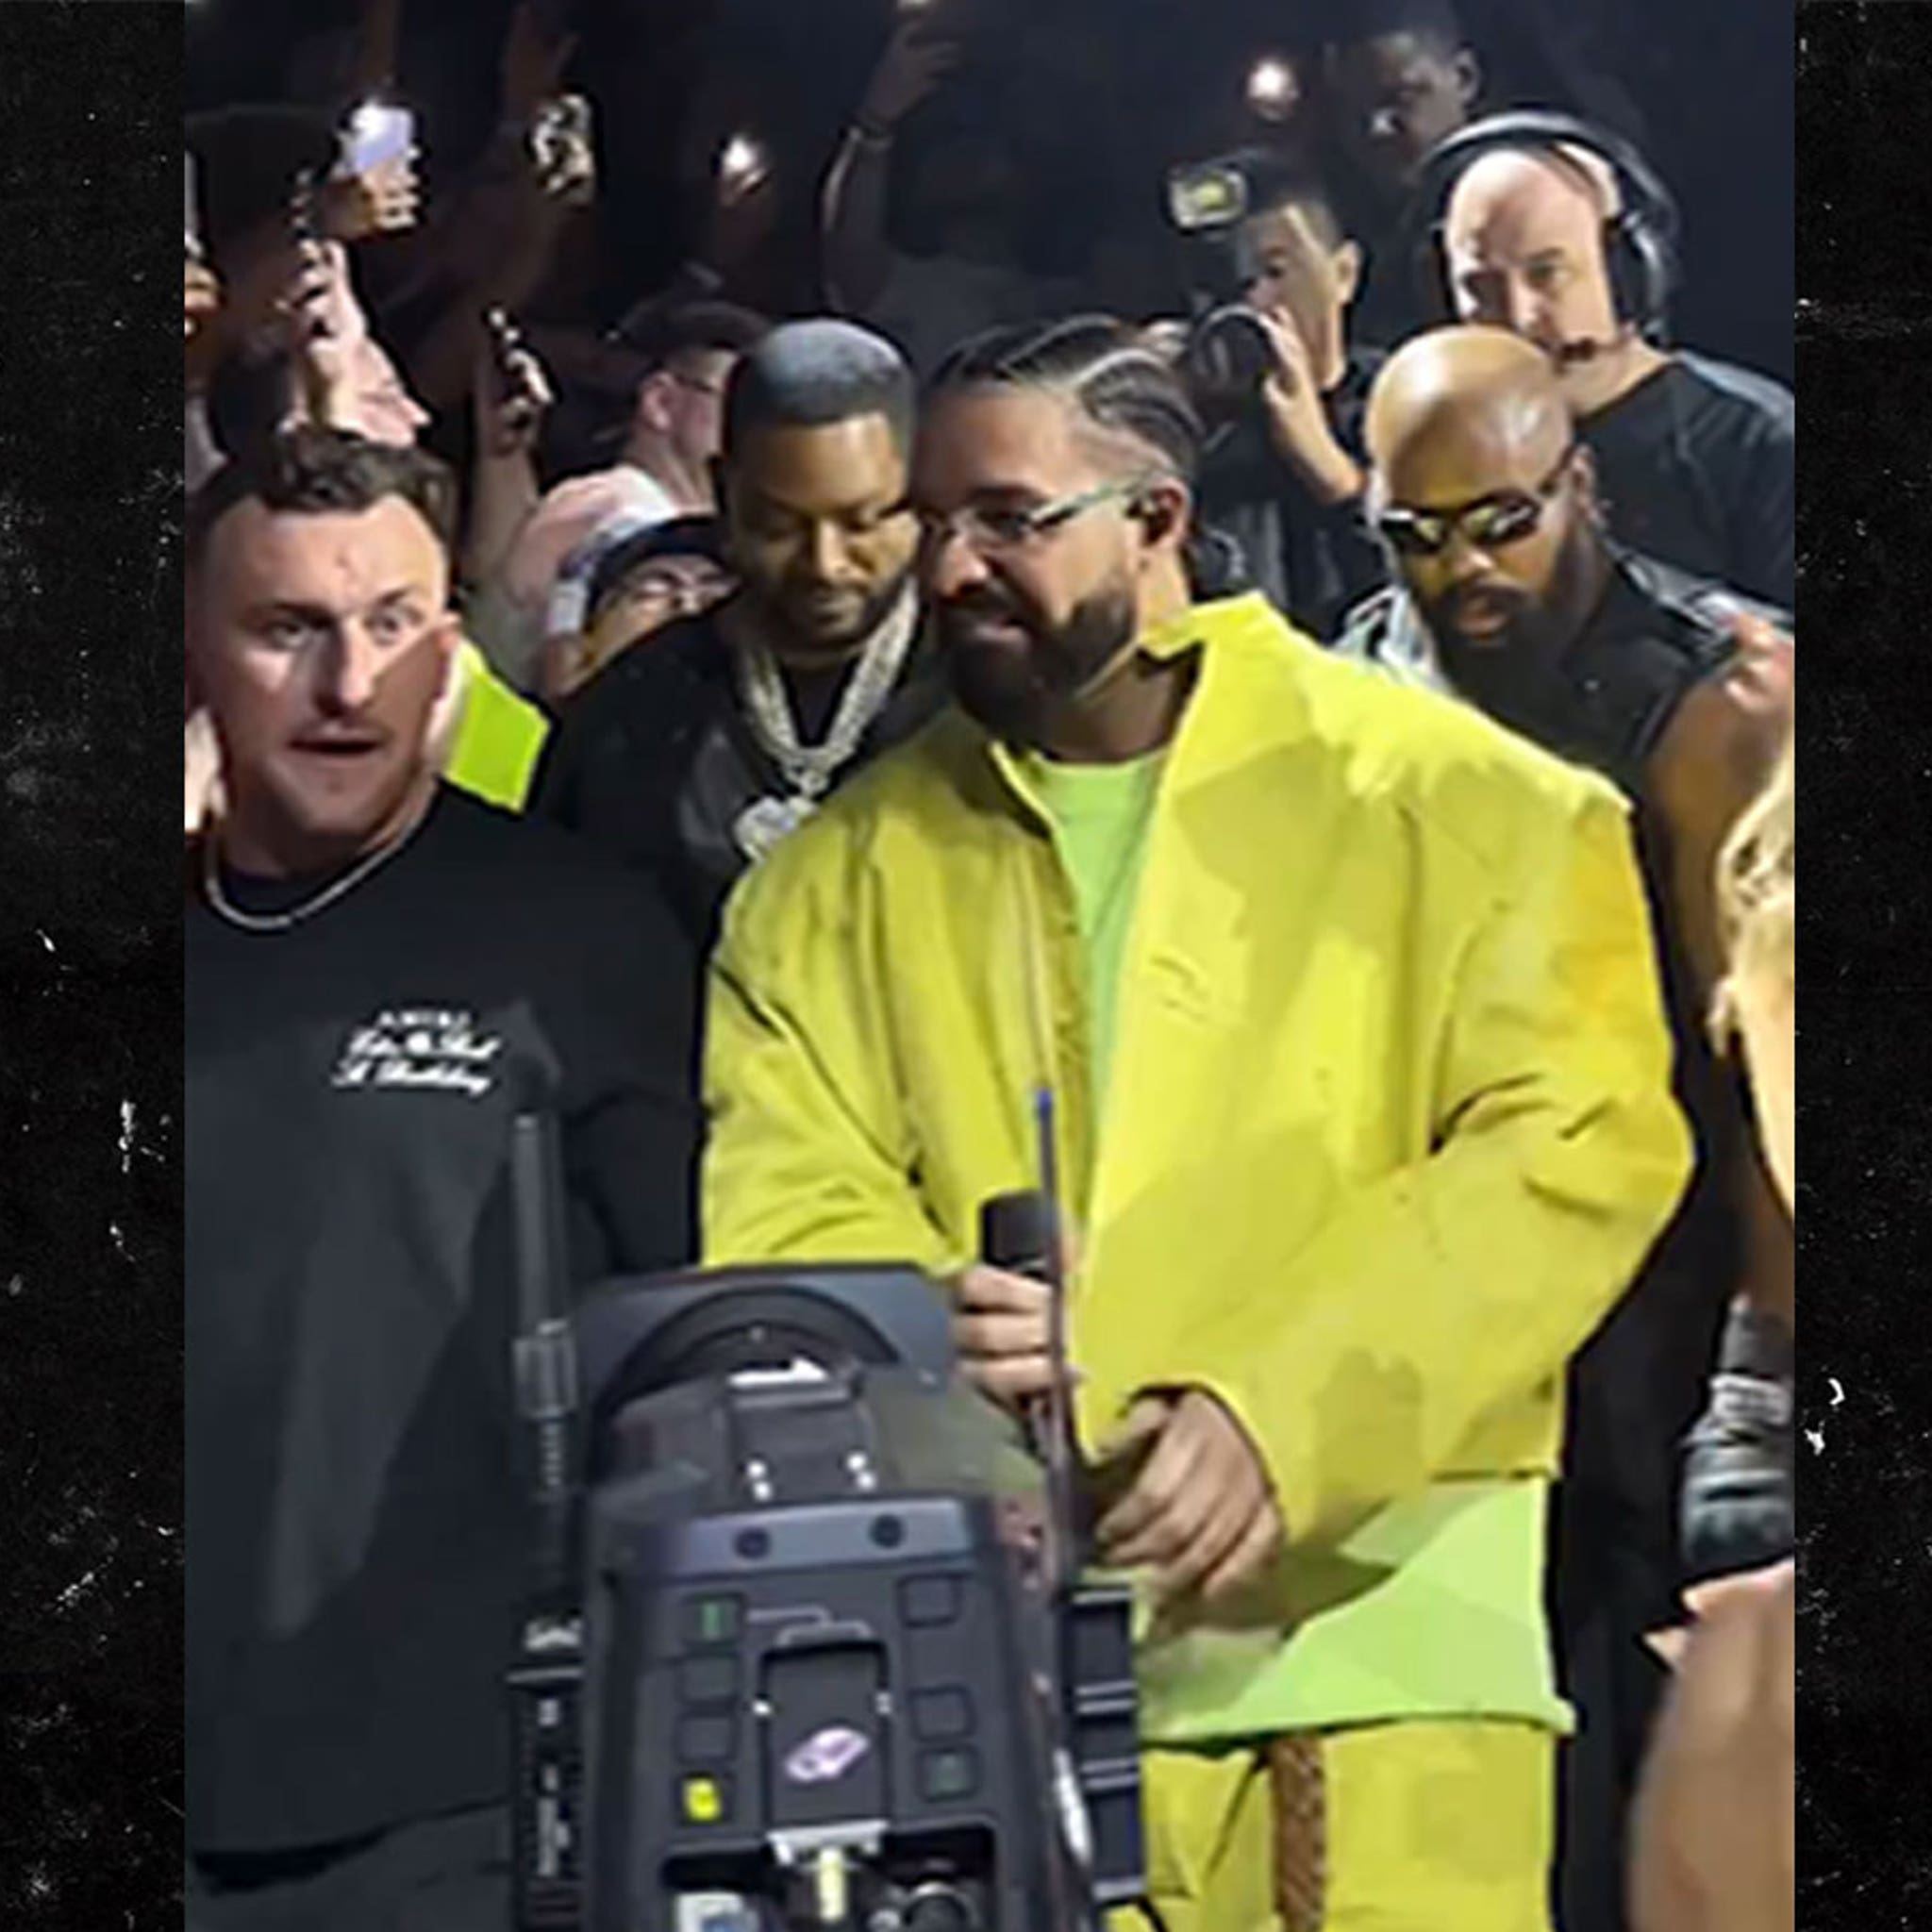 Drake dazzles Houston with Johnny Manziel cameo and H-Town shout